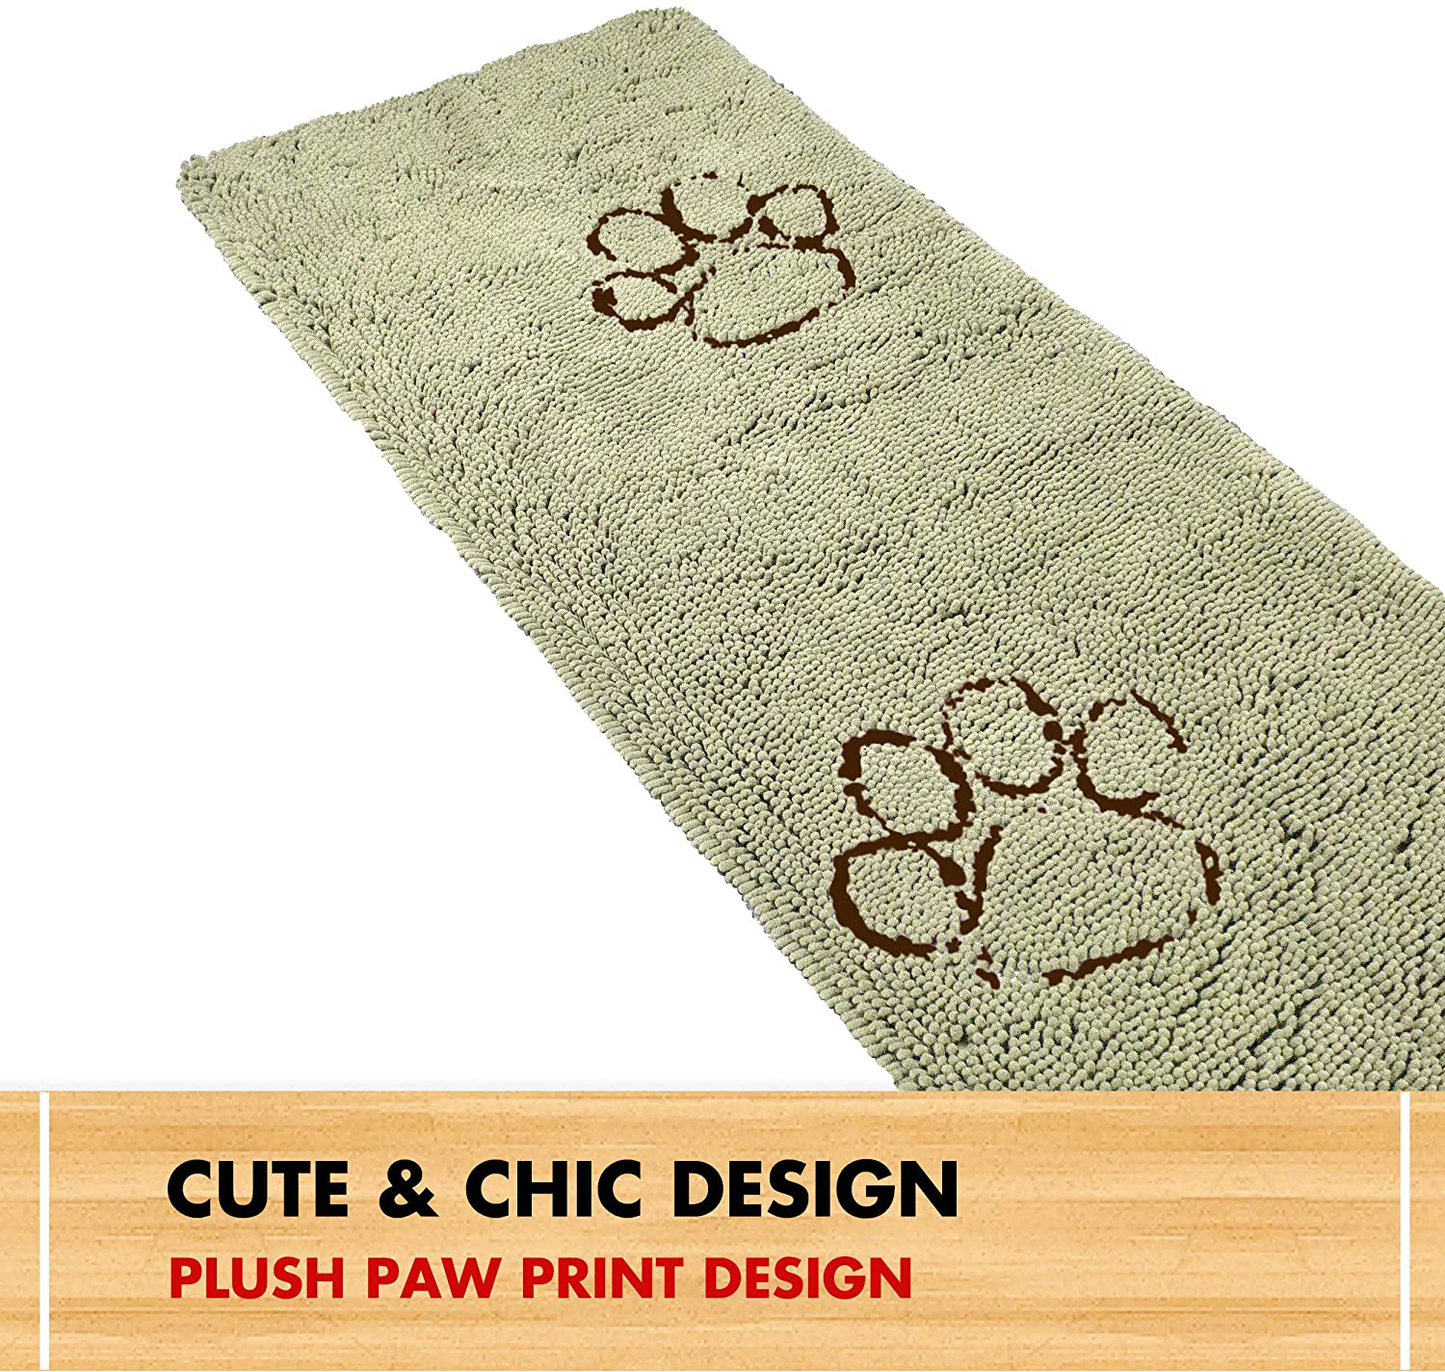  My Doggy Place Microfiber Dog Mat for Muddy Paws (36 x 26,  Teal) Non-Slip Dog Door Mat, Absorbent Quick-Drying Paw Cleaning Pet Mat -  Washer and Dryer Safe - Entryway